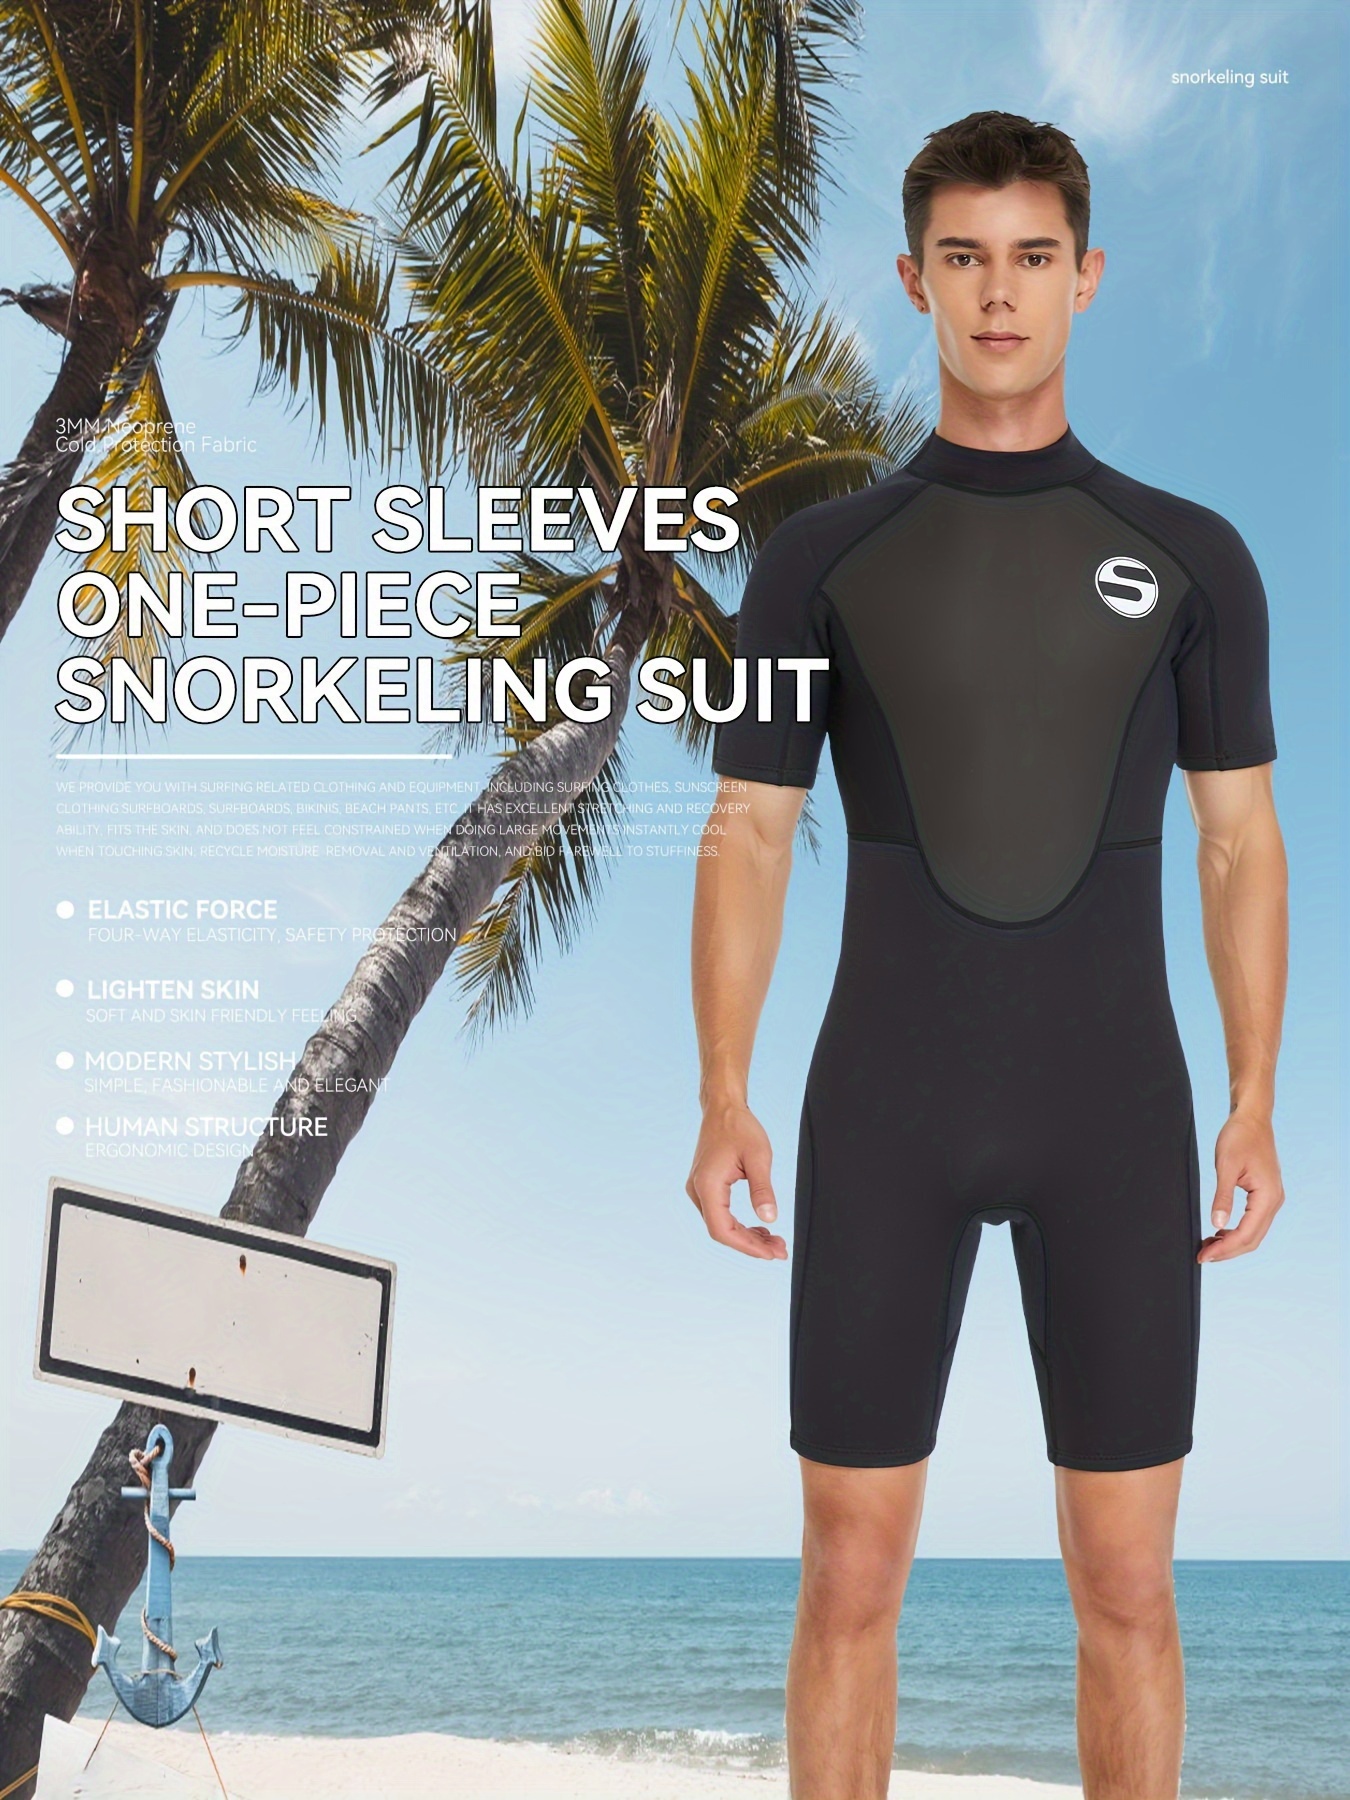 Mens and Womens Wetsuits 2mm, Adult One Piece Full Body Long Sleeves  Neoprene Wet Suits 1.5mm for Surfing Diving Snorkeling Kayaking Canoeing  SUP